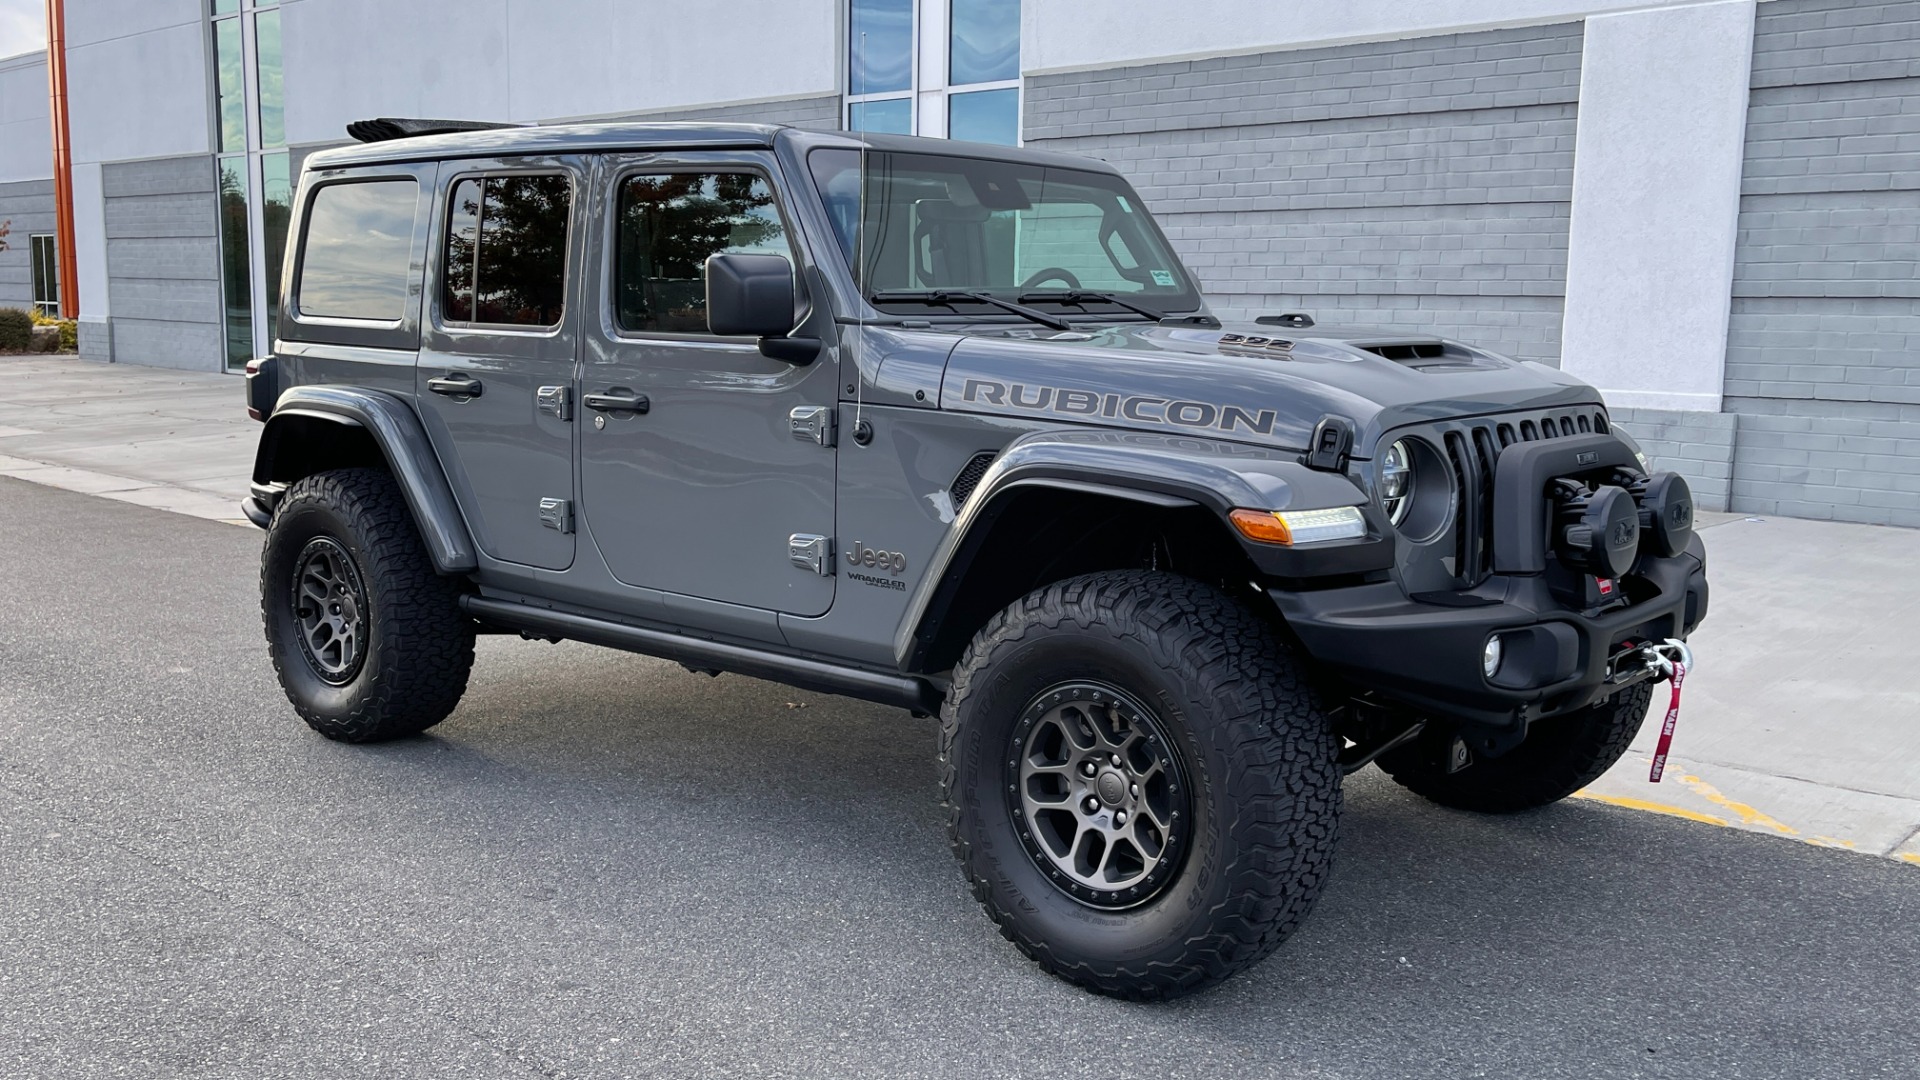 Used 2022 Jeep Wrangler UNLIMITED RUBICON 392 $10K AEV UPGRADES / XTREME RECON / SKY ONE TOUCH for sale $95,798 at Formula Imports in Charlotte NC 28227 5